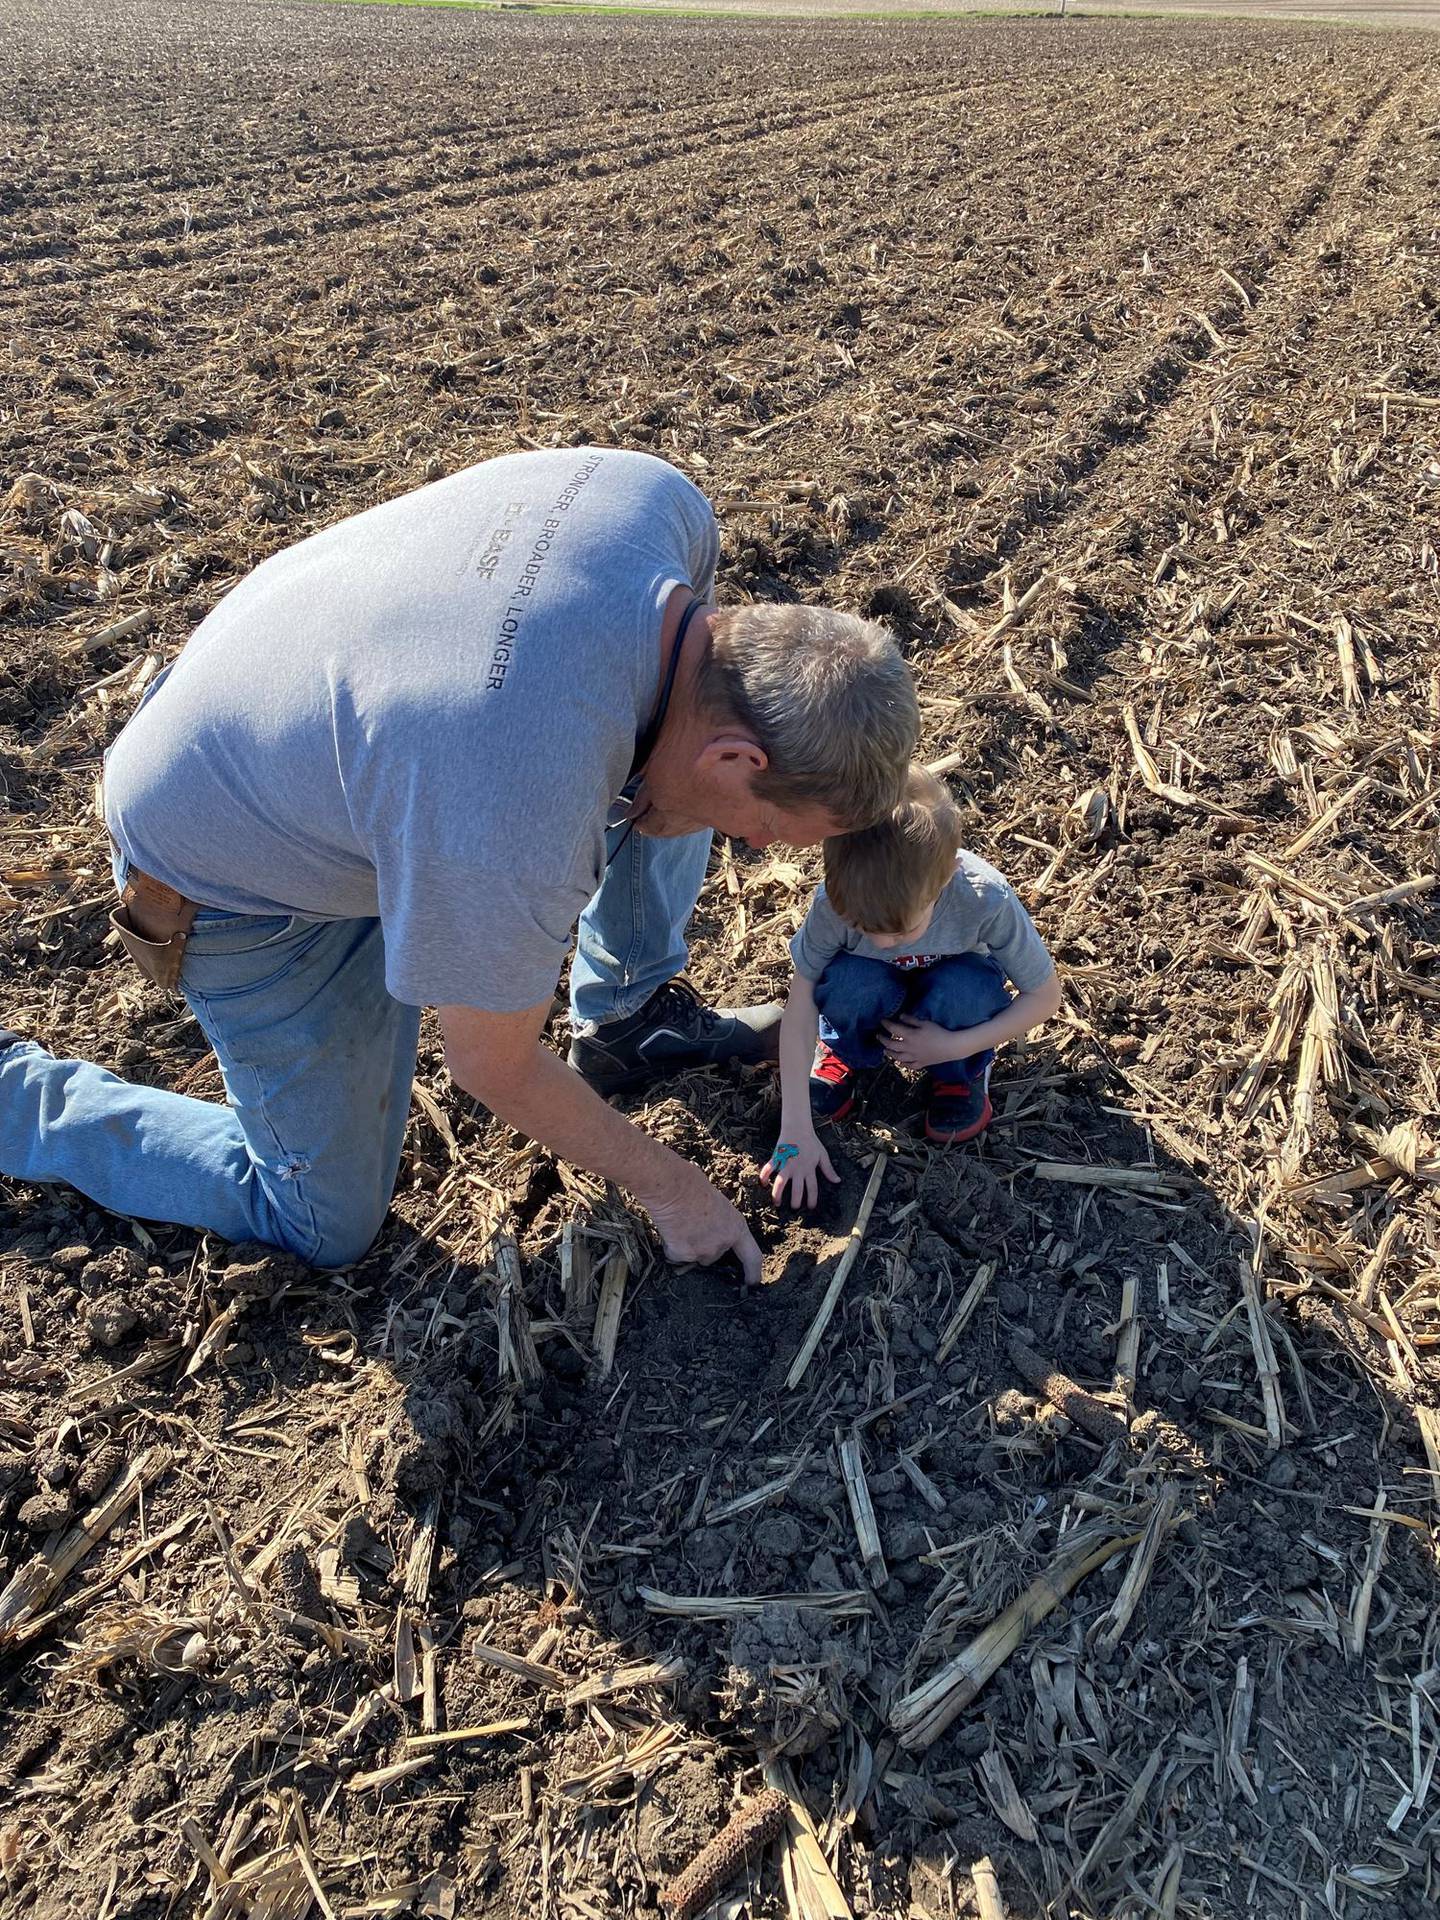 “Grandpa sharing knowledge” — Jennifer Koehler: “Grandpa checking soybean seed depth with grandson, passing on his knowledge.”